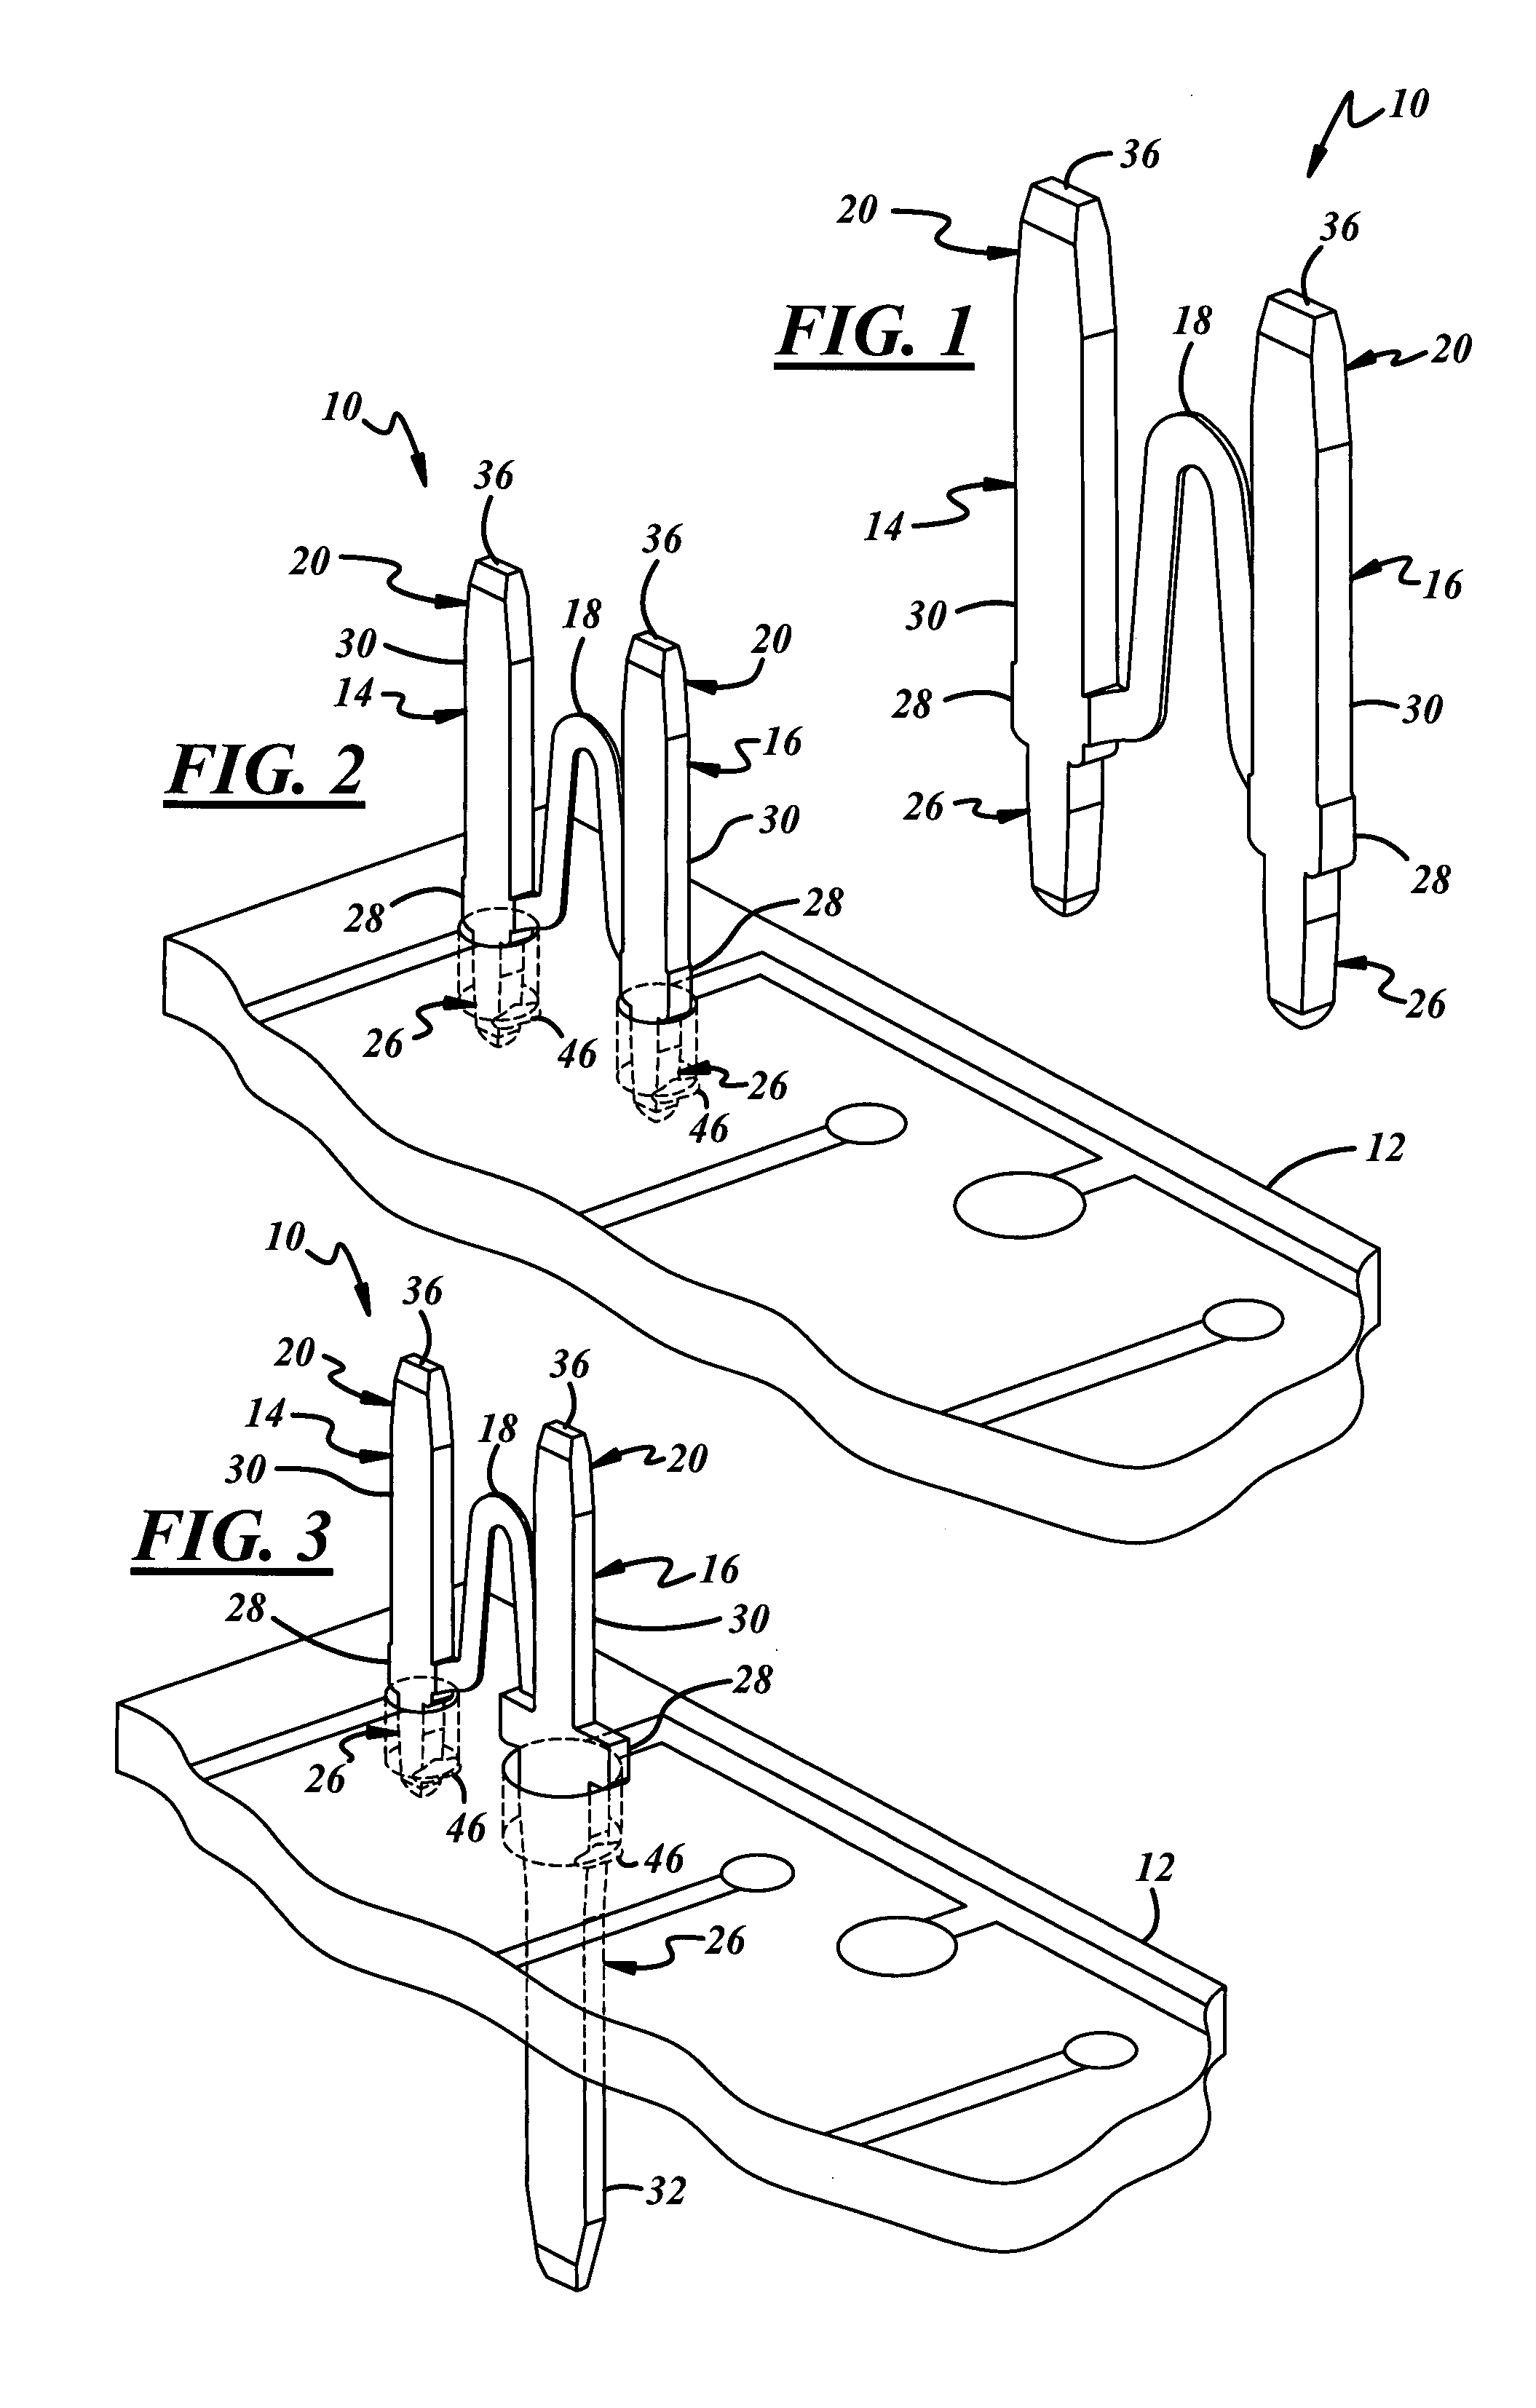 System and method for interconnecting a plurality of printed circuits